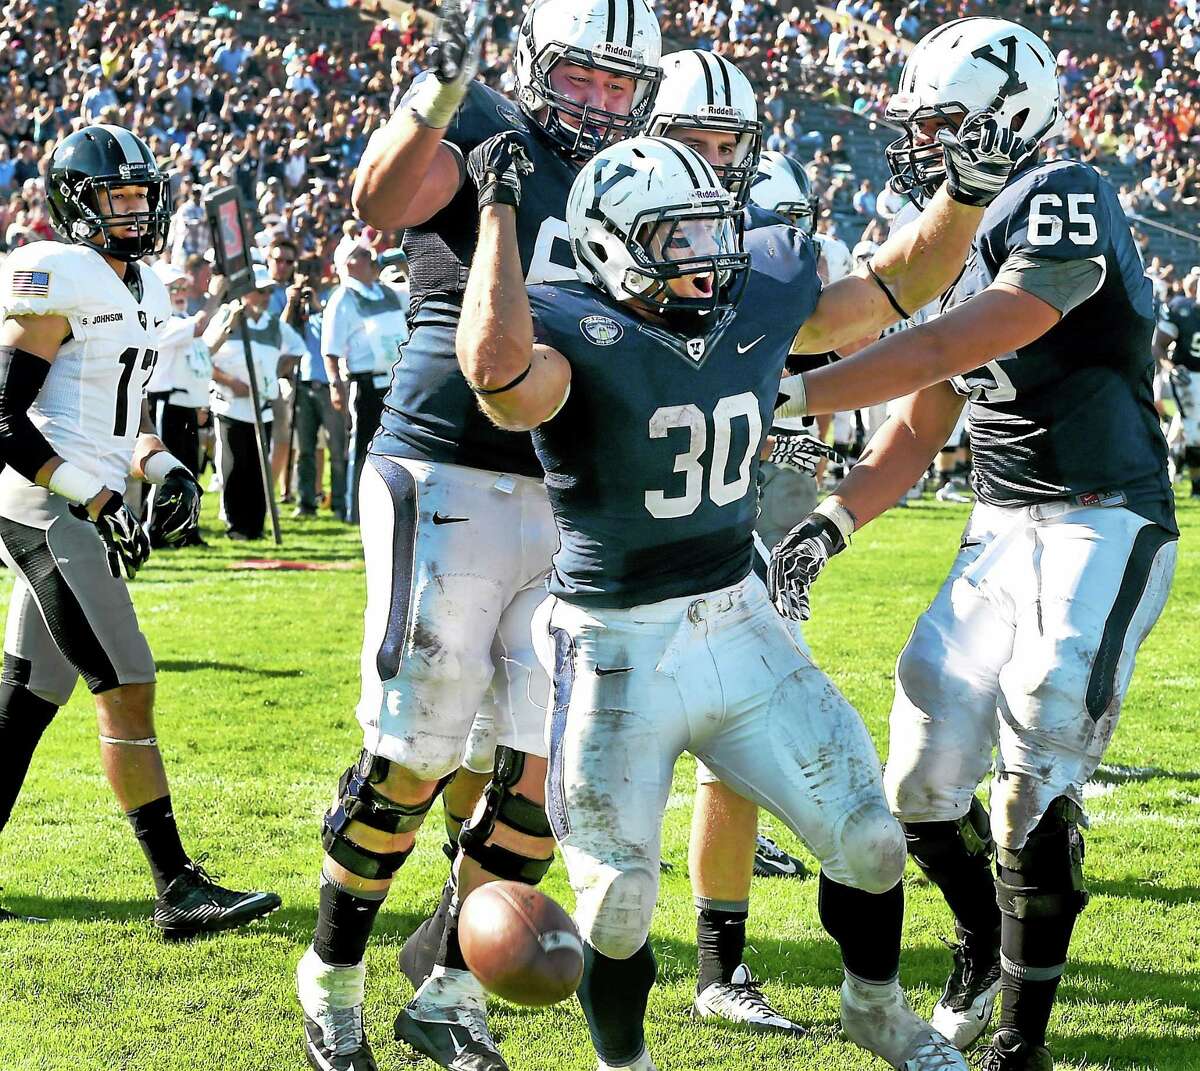 Yale running back Tyler Varga went undrafted but is signing with the Indianapolis Colts.